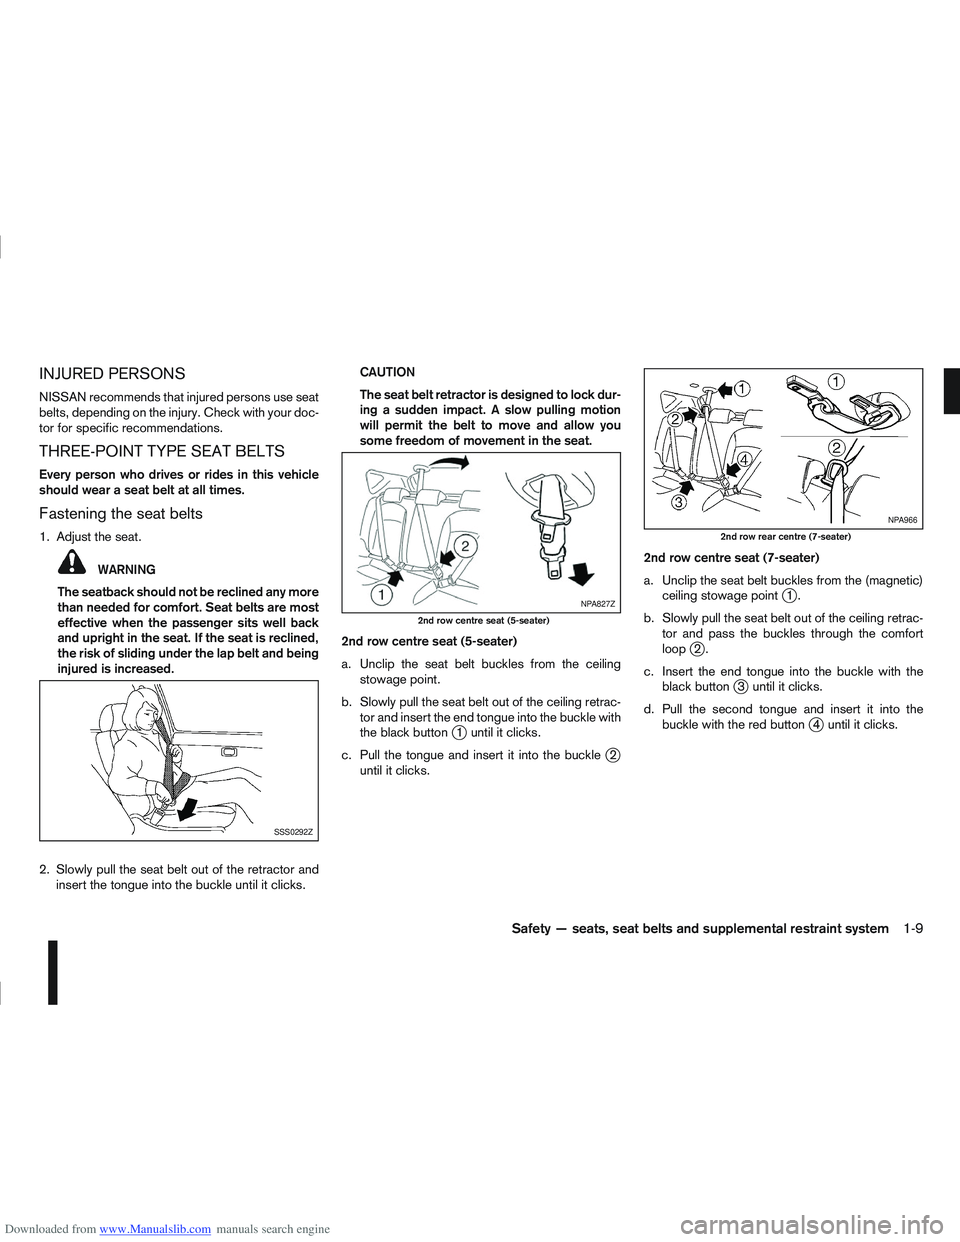 NISSAN QASHQAI 2007 Owners Manual Downloaded from www.Manualslib.com manuals search engine INJURED PERSONS
NISSAN recommends that injured persons use seat
belts, depending on the injury. Check with your doc-
tor for specific recommend